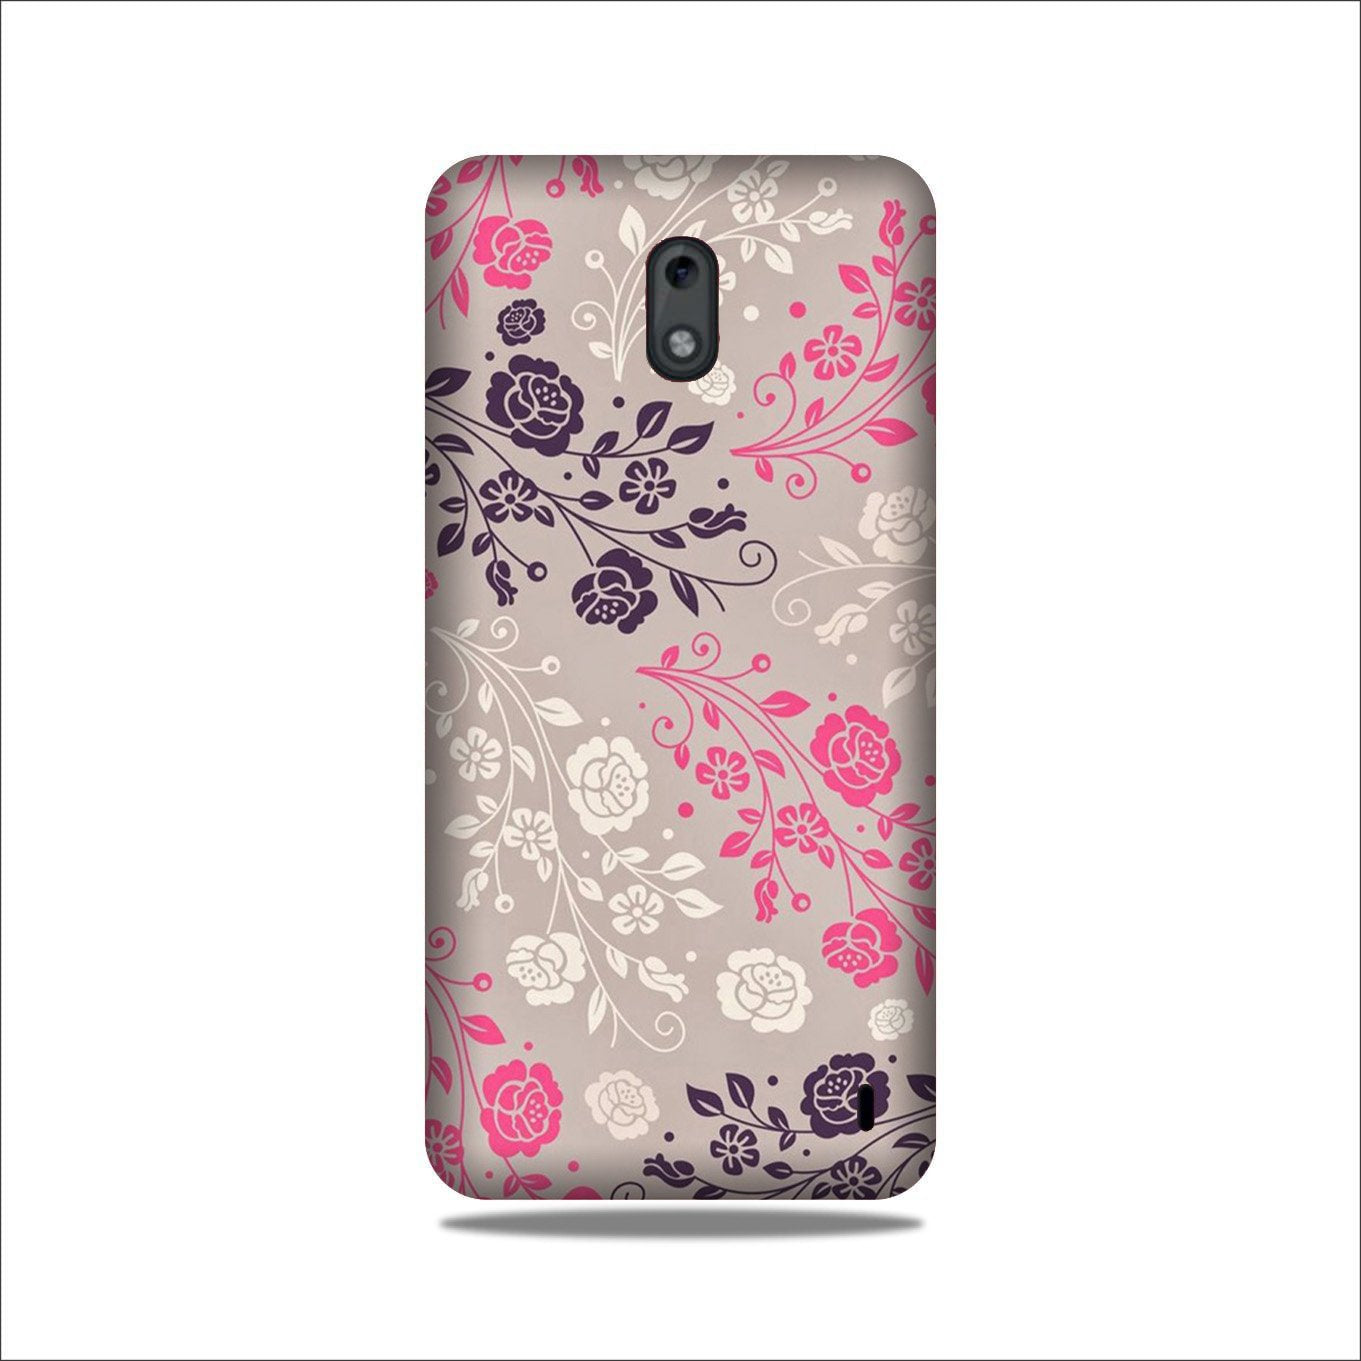 Pattern2 Case for Nokia 2